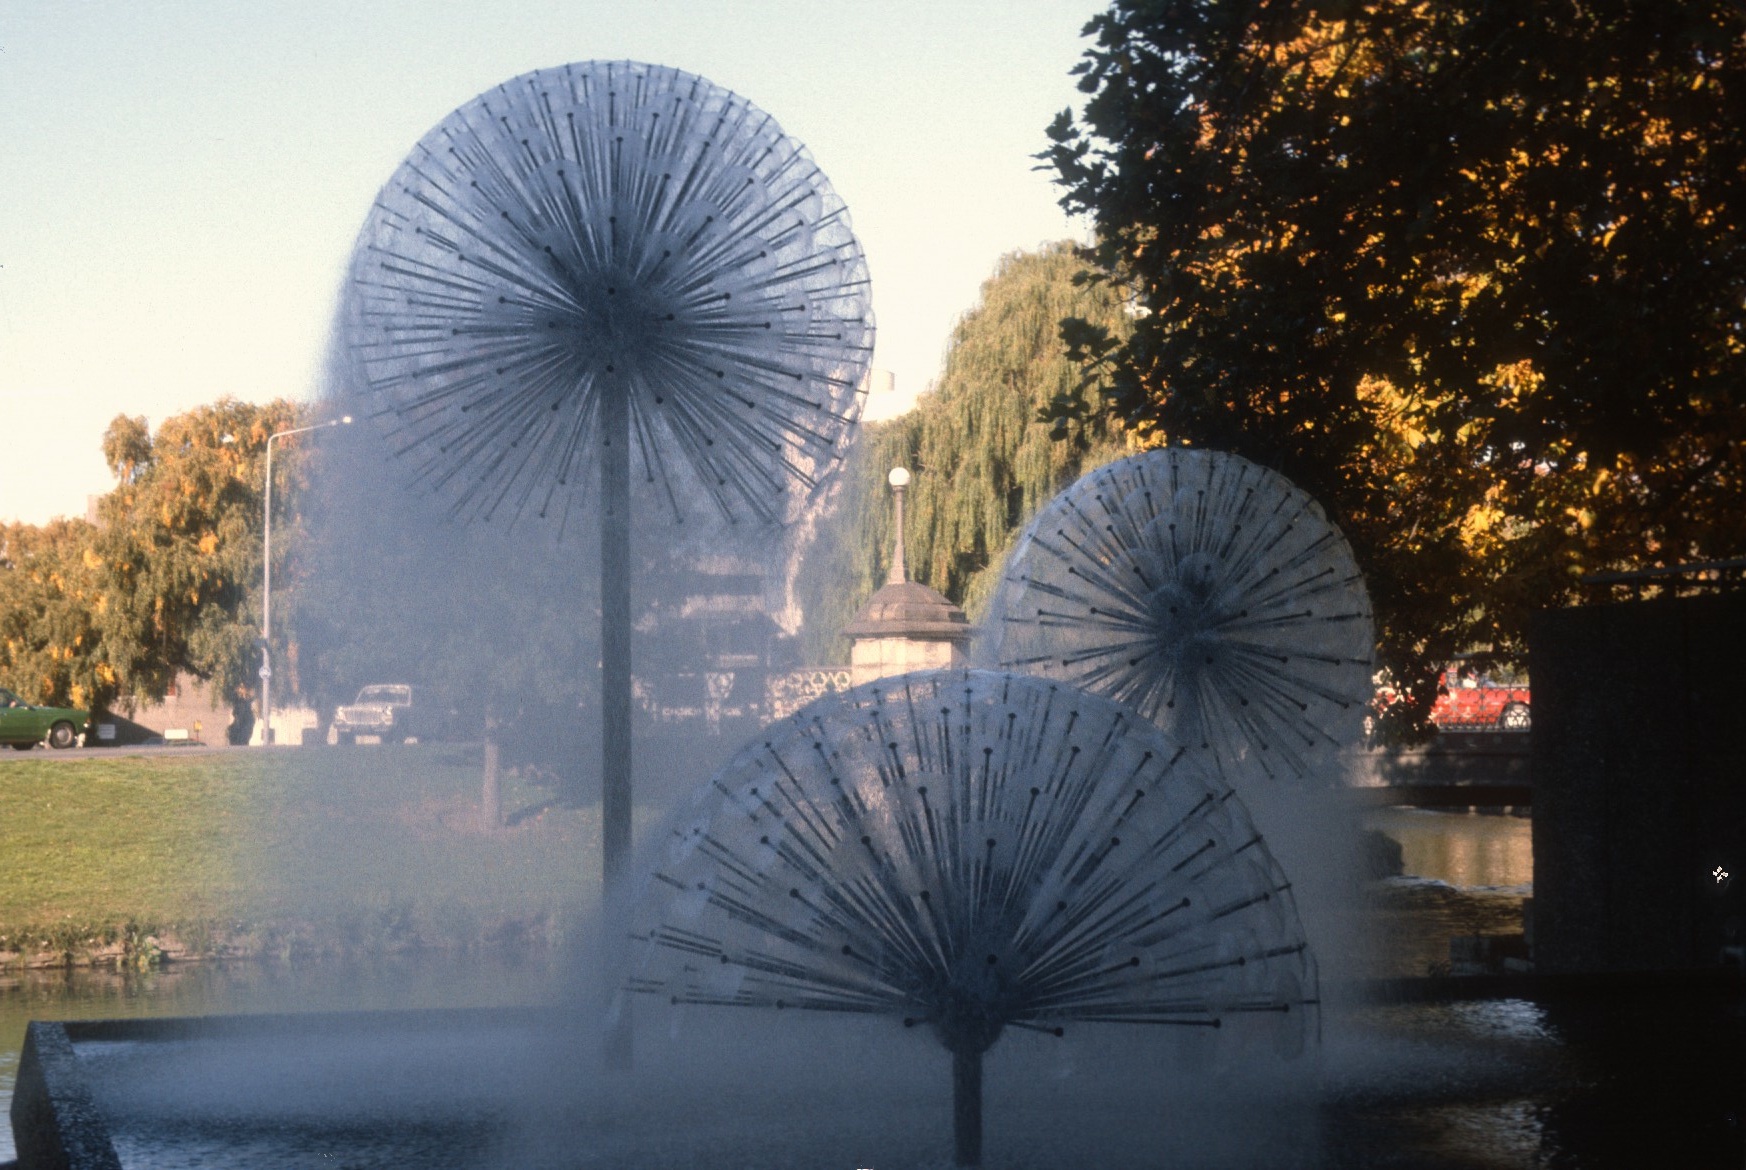 there are two umbrella shaped fountains in the park